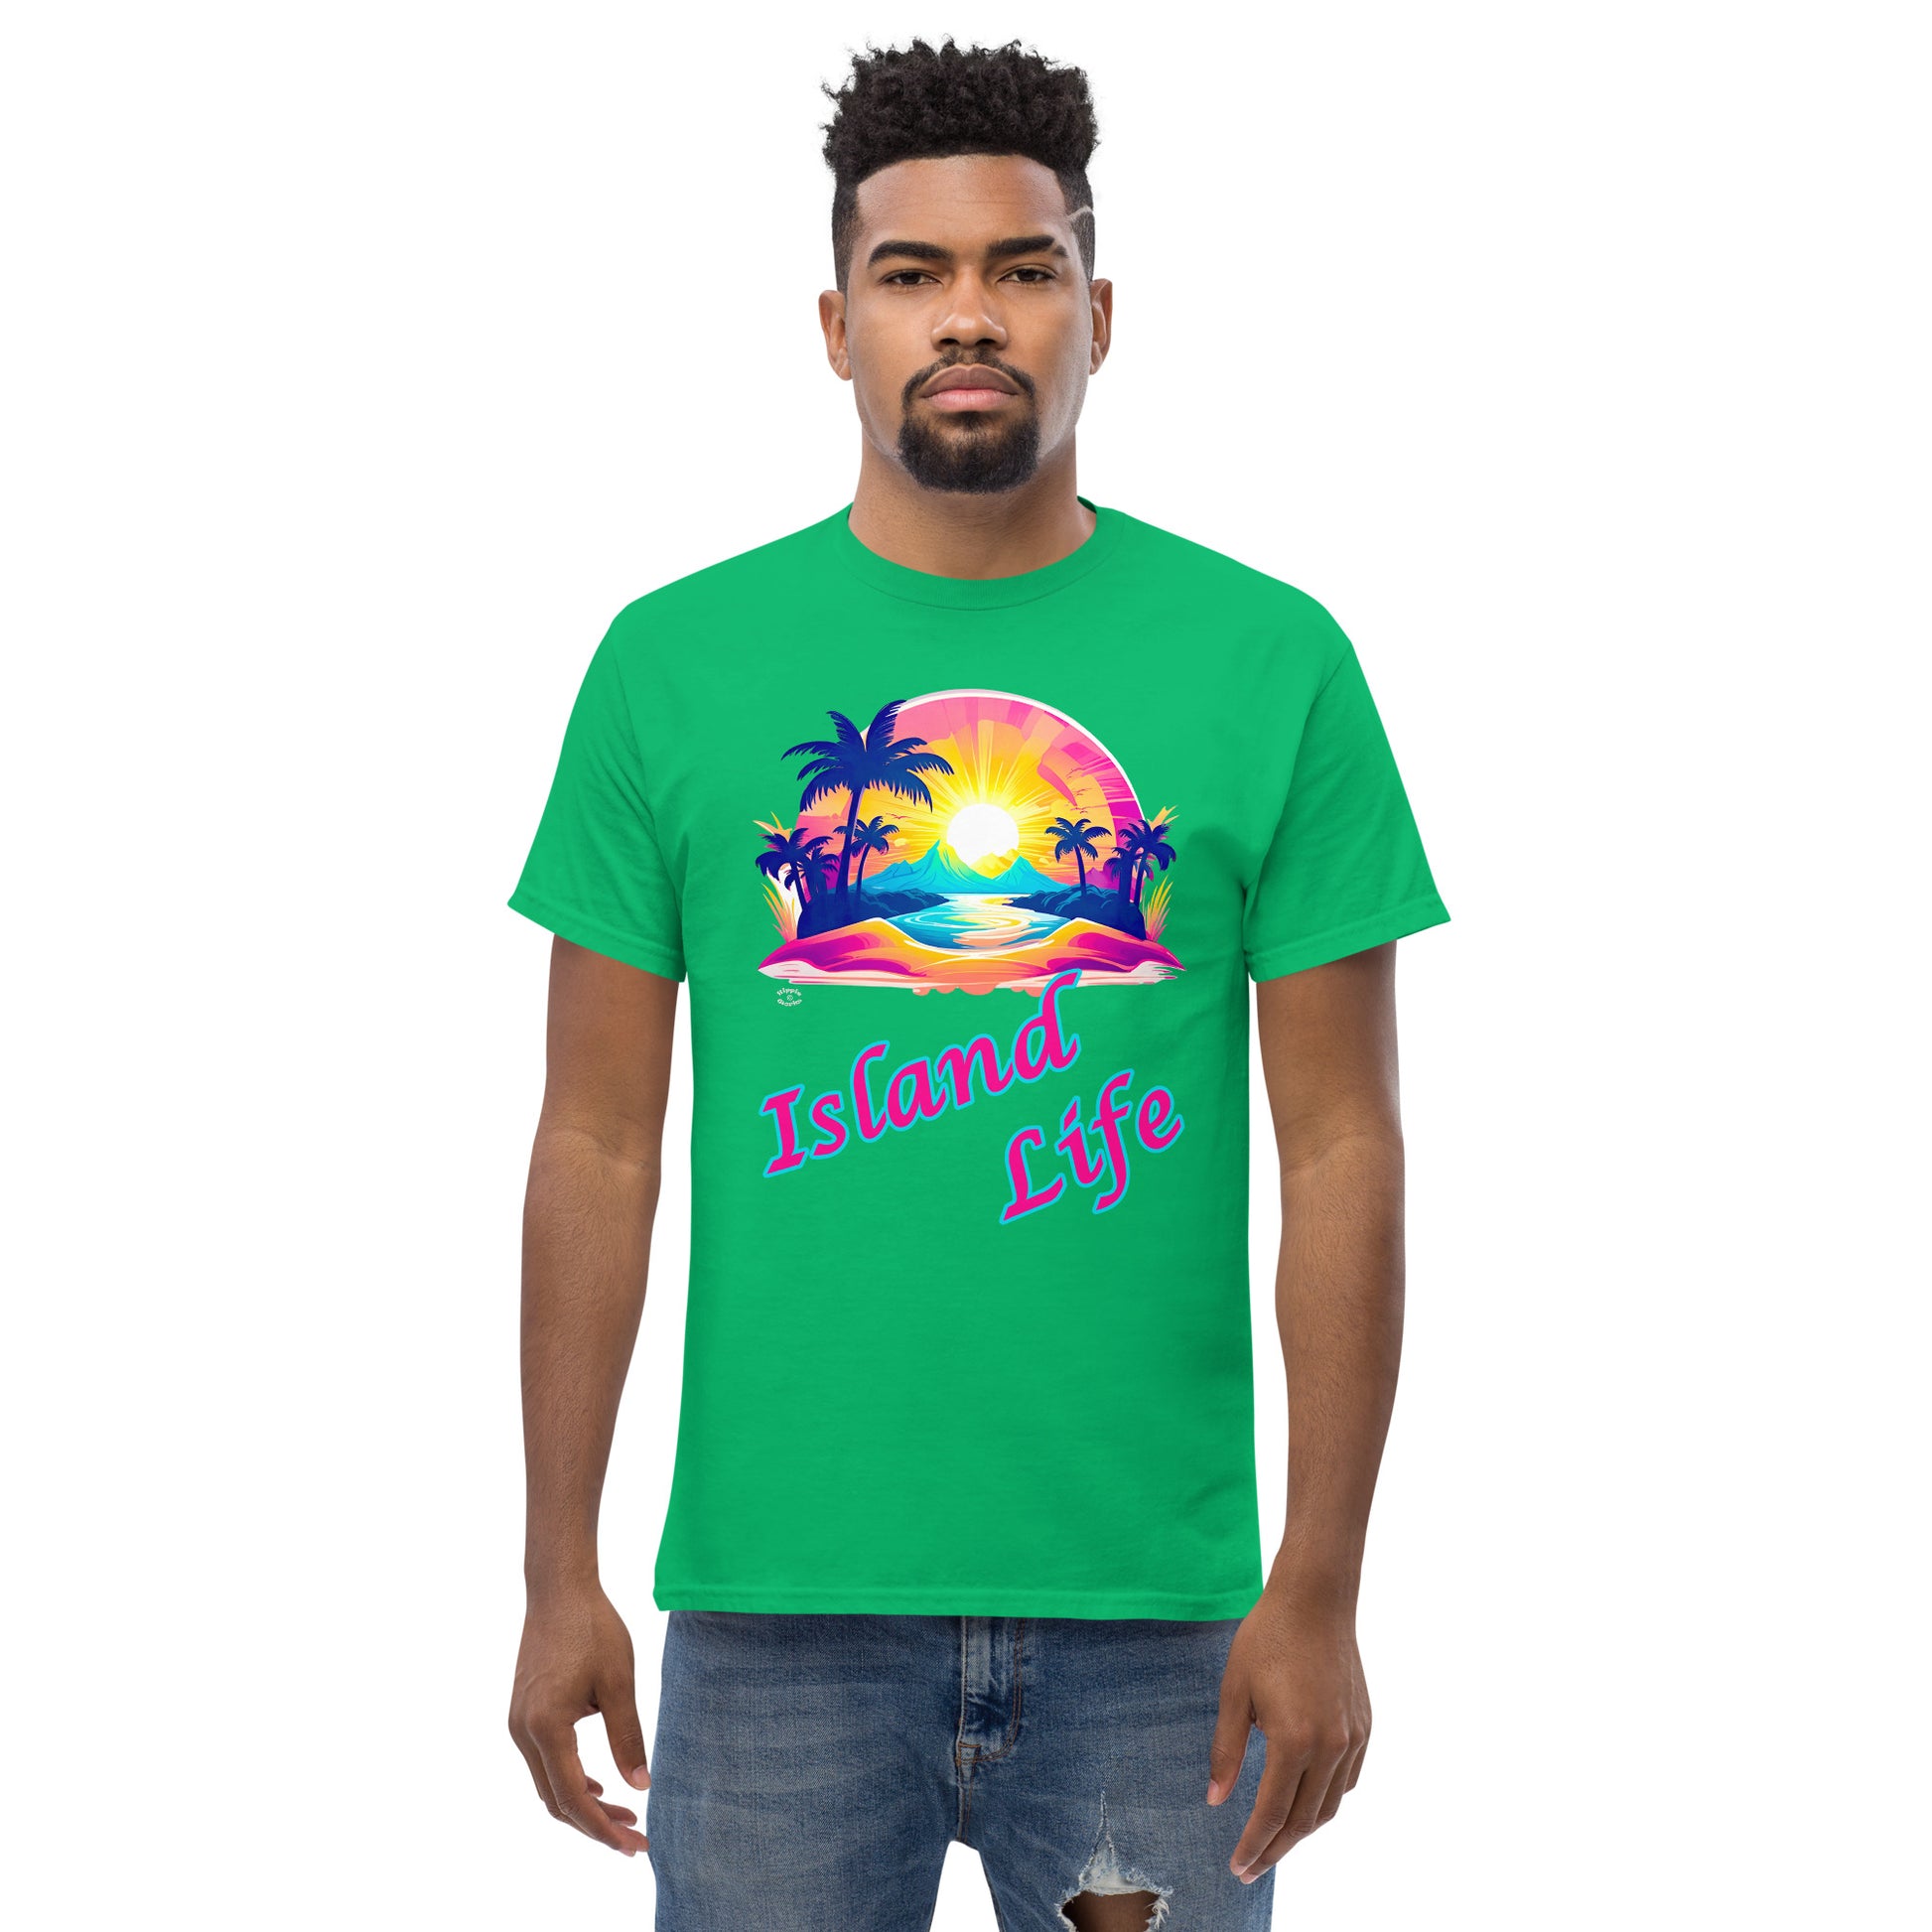 A picture of a man modeling a Men's Classic Tee / Tshirt with a large picture on the front of a tropical island paradise and the text Island Life underneath - front - irish green